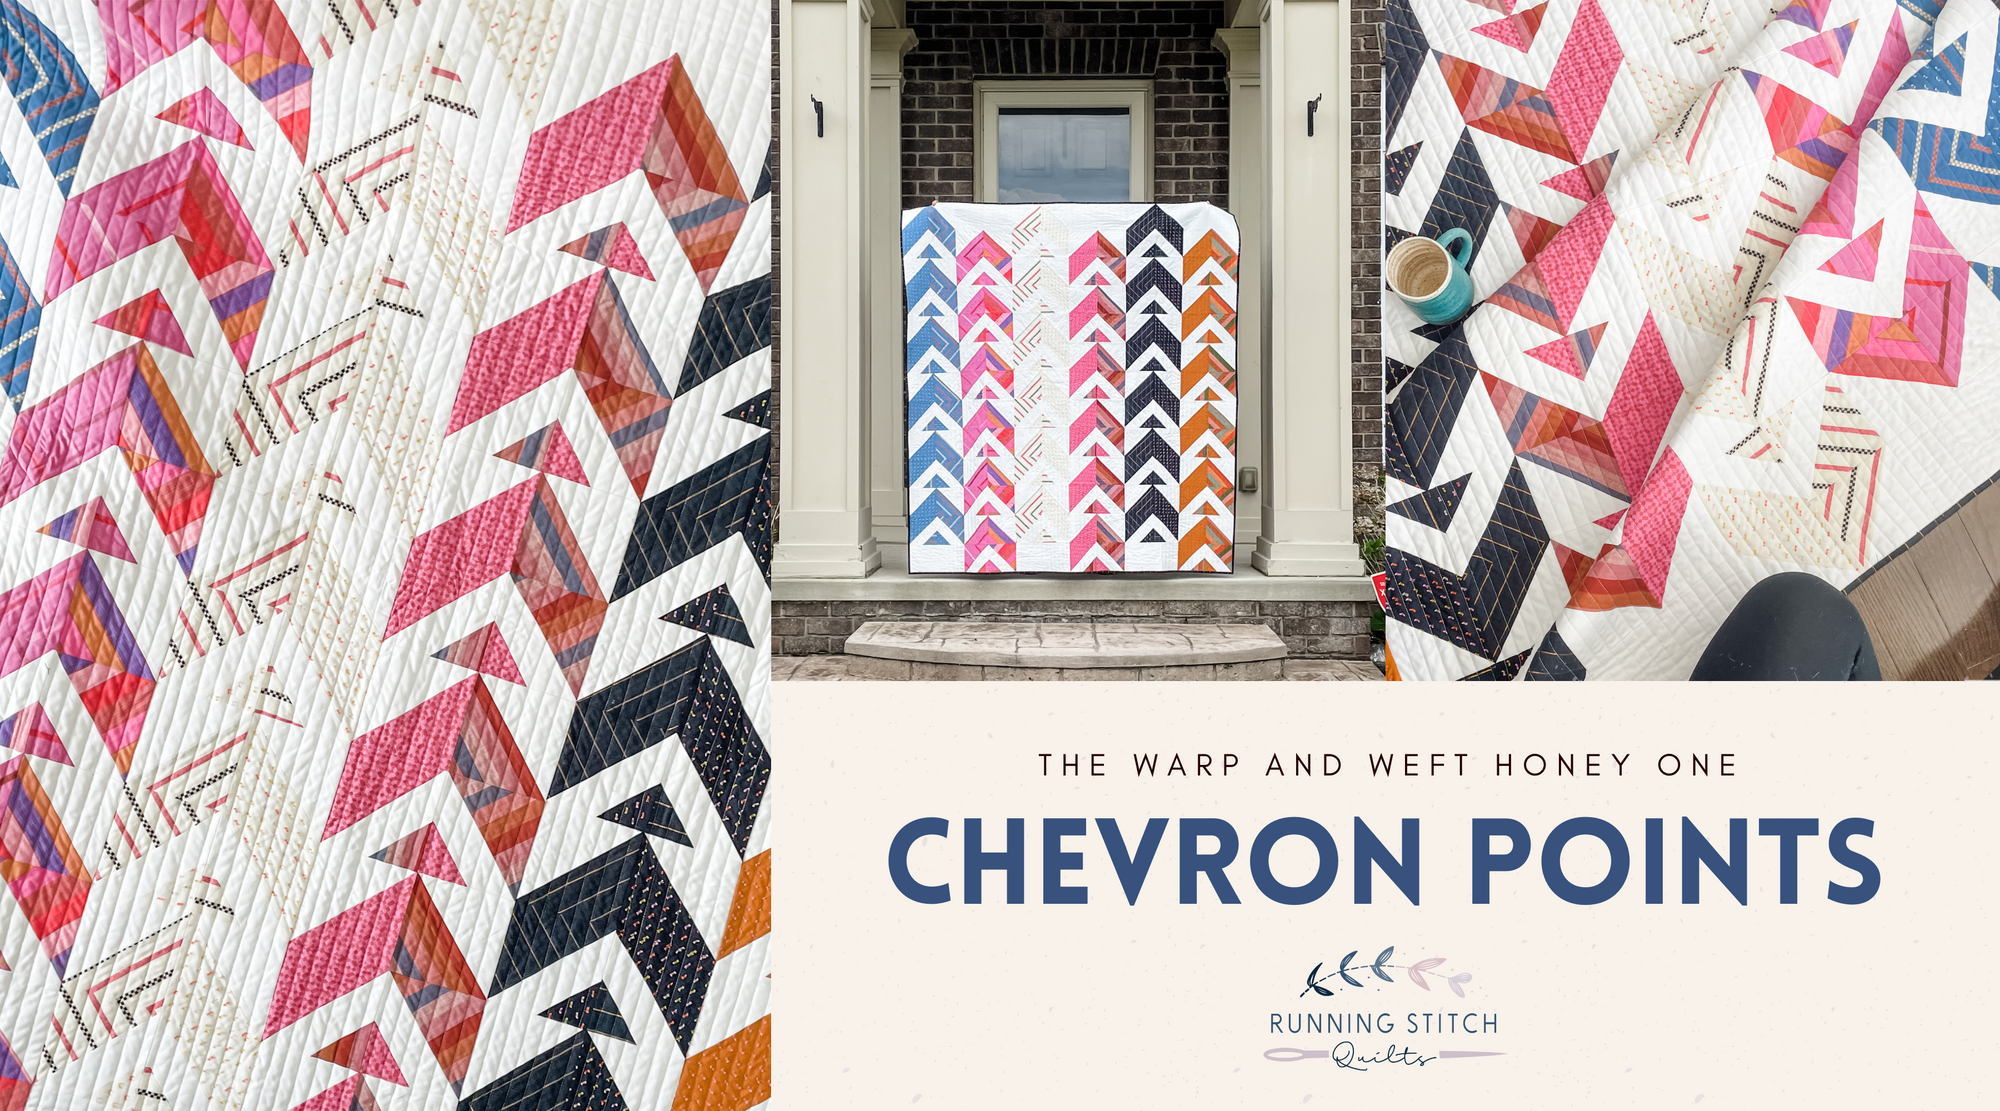 Chevron Points - The Warp and Weft Honey One